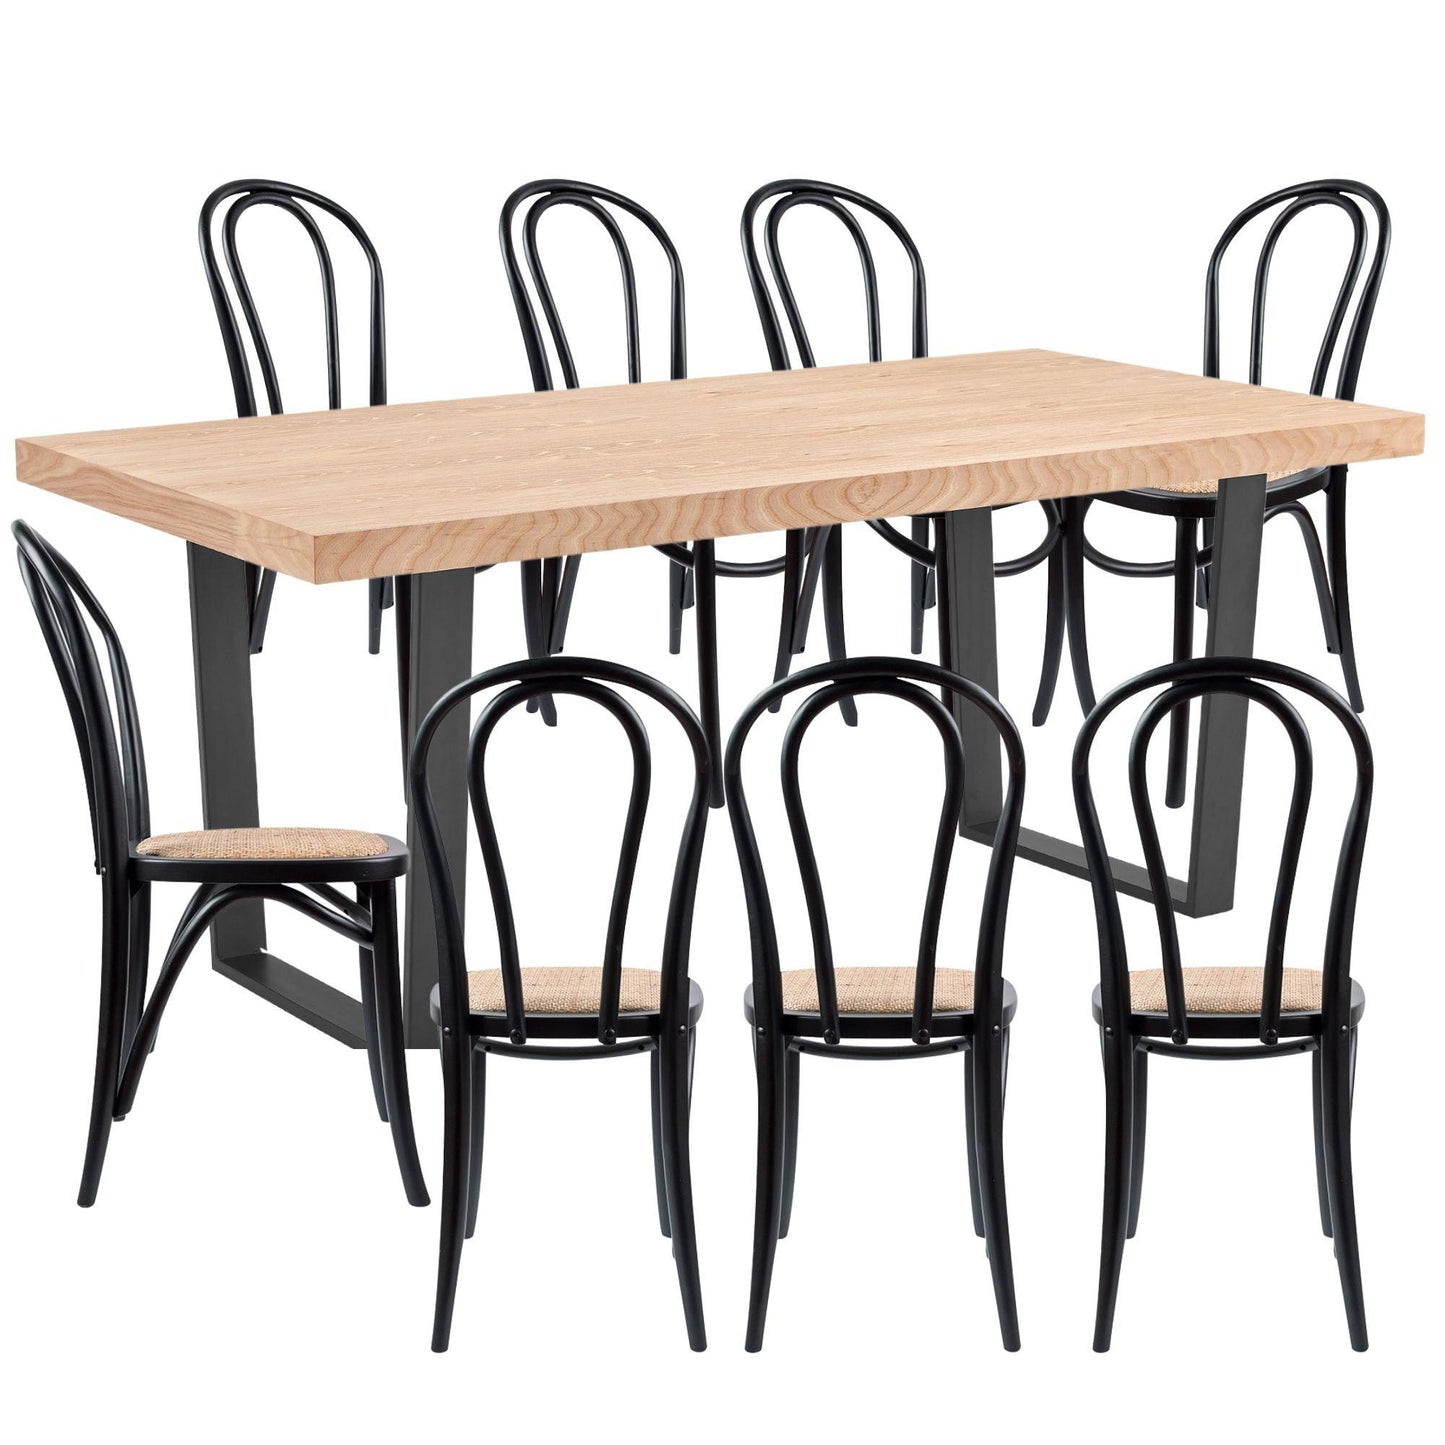 Petunia 9pc 210cm Dining Table Set 8 Arched Back Chair Elm Timber Wood